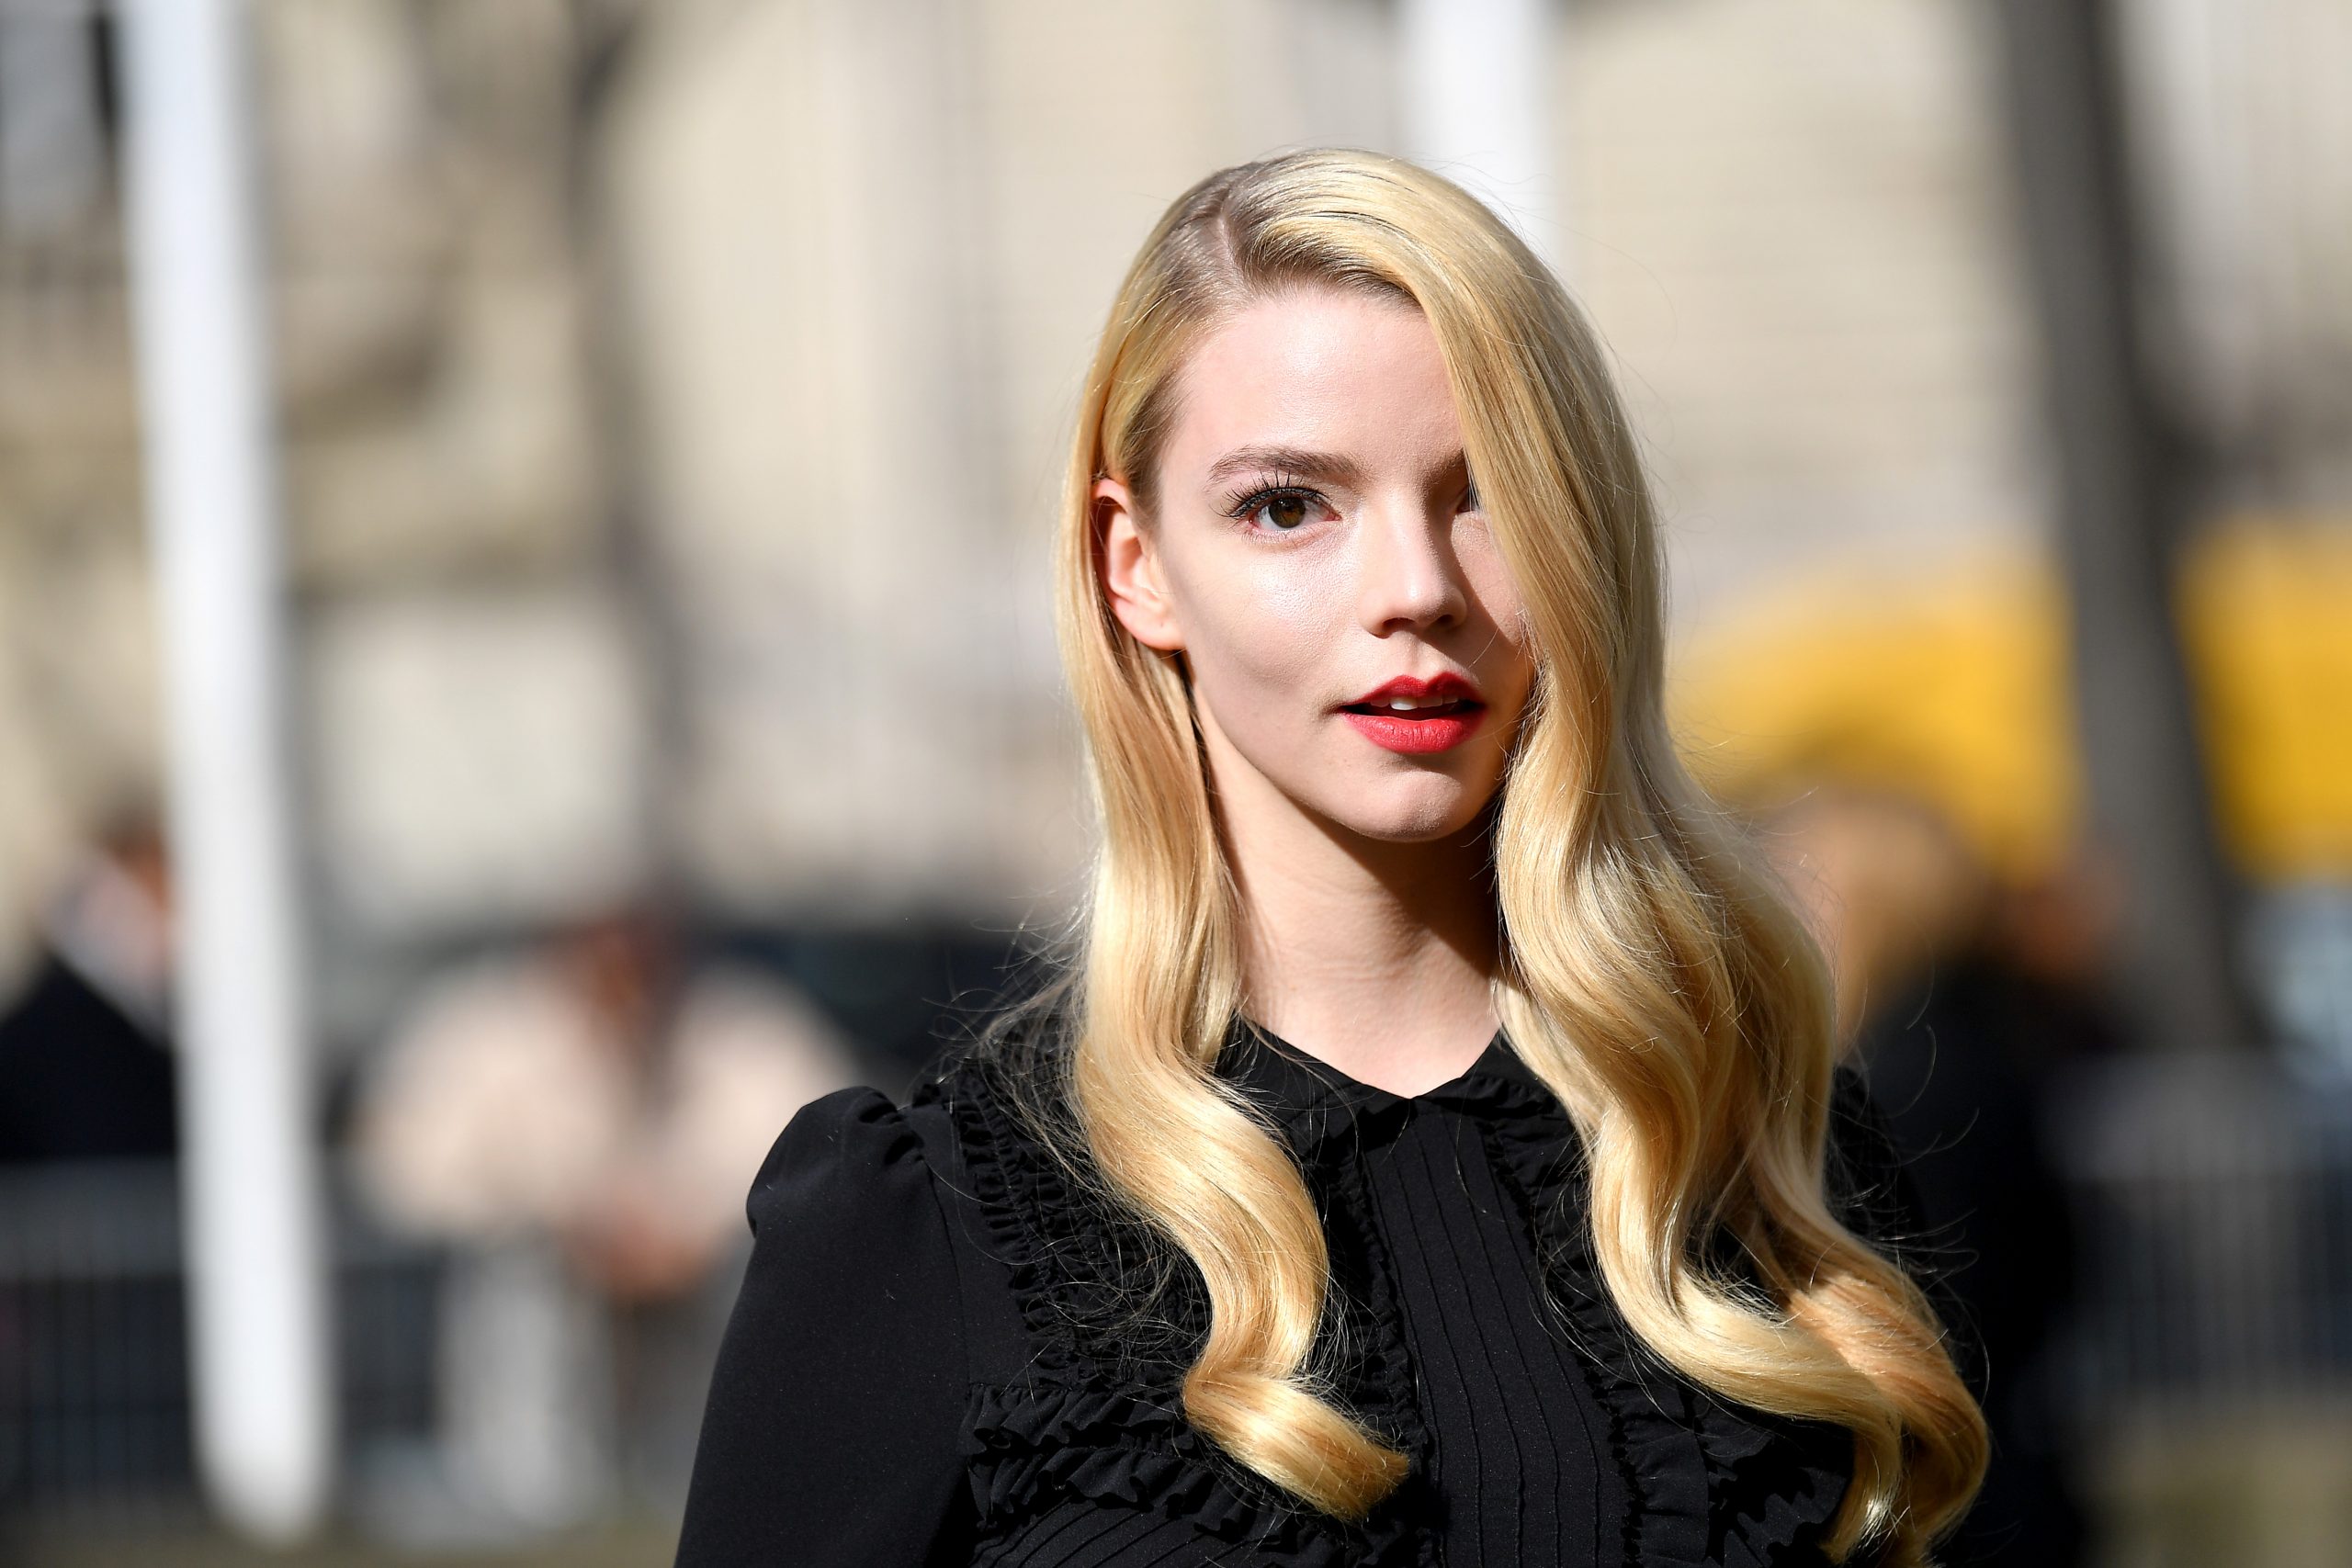 Anya Taylor-Joy to play chess prodigy in The Queen's Gambit, a new